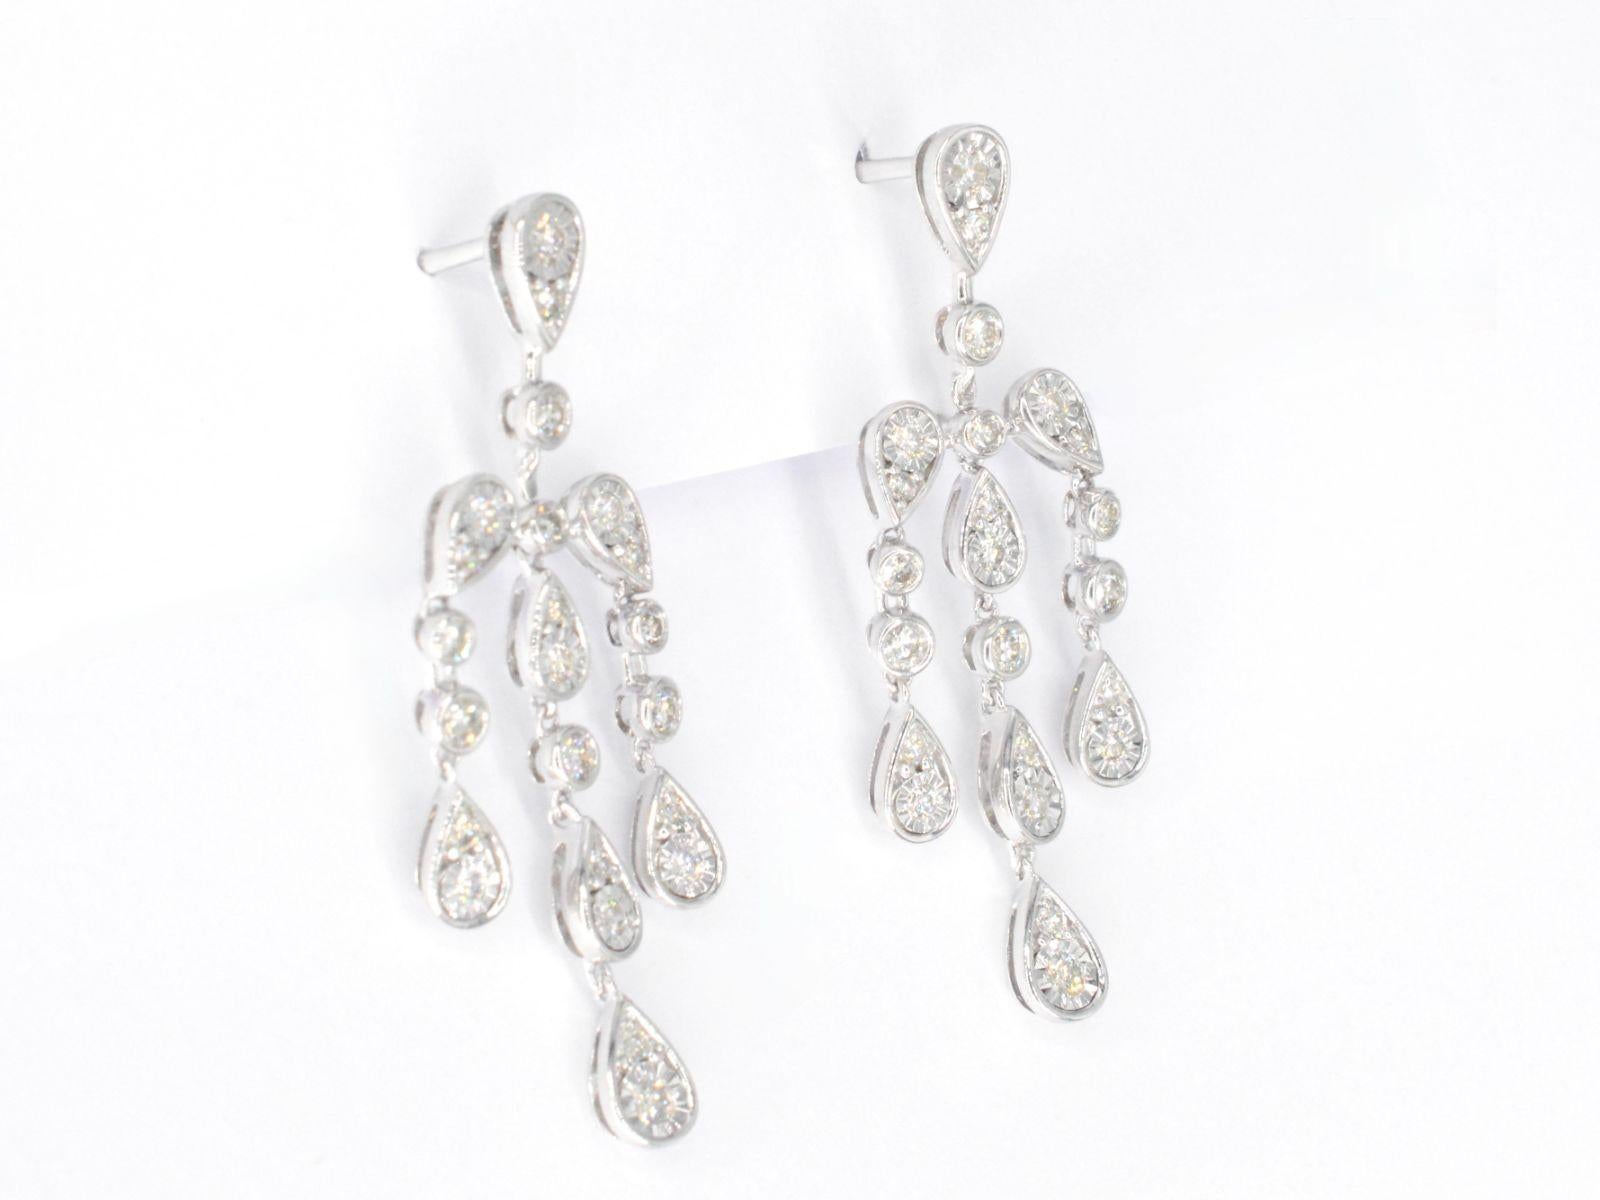 002283. Jewel: Earrings
  Weight: 8.60 grams
  Length: 43mm
  Hallmark: 14 karat 585


Diamonds
  Cut: Round brilliant cut
  Weight: 1.40 carat total 46 pieces
  Colour: F - G
  Purity: VS - VS
  Grinding quality: Very good to good

- Comes with an